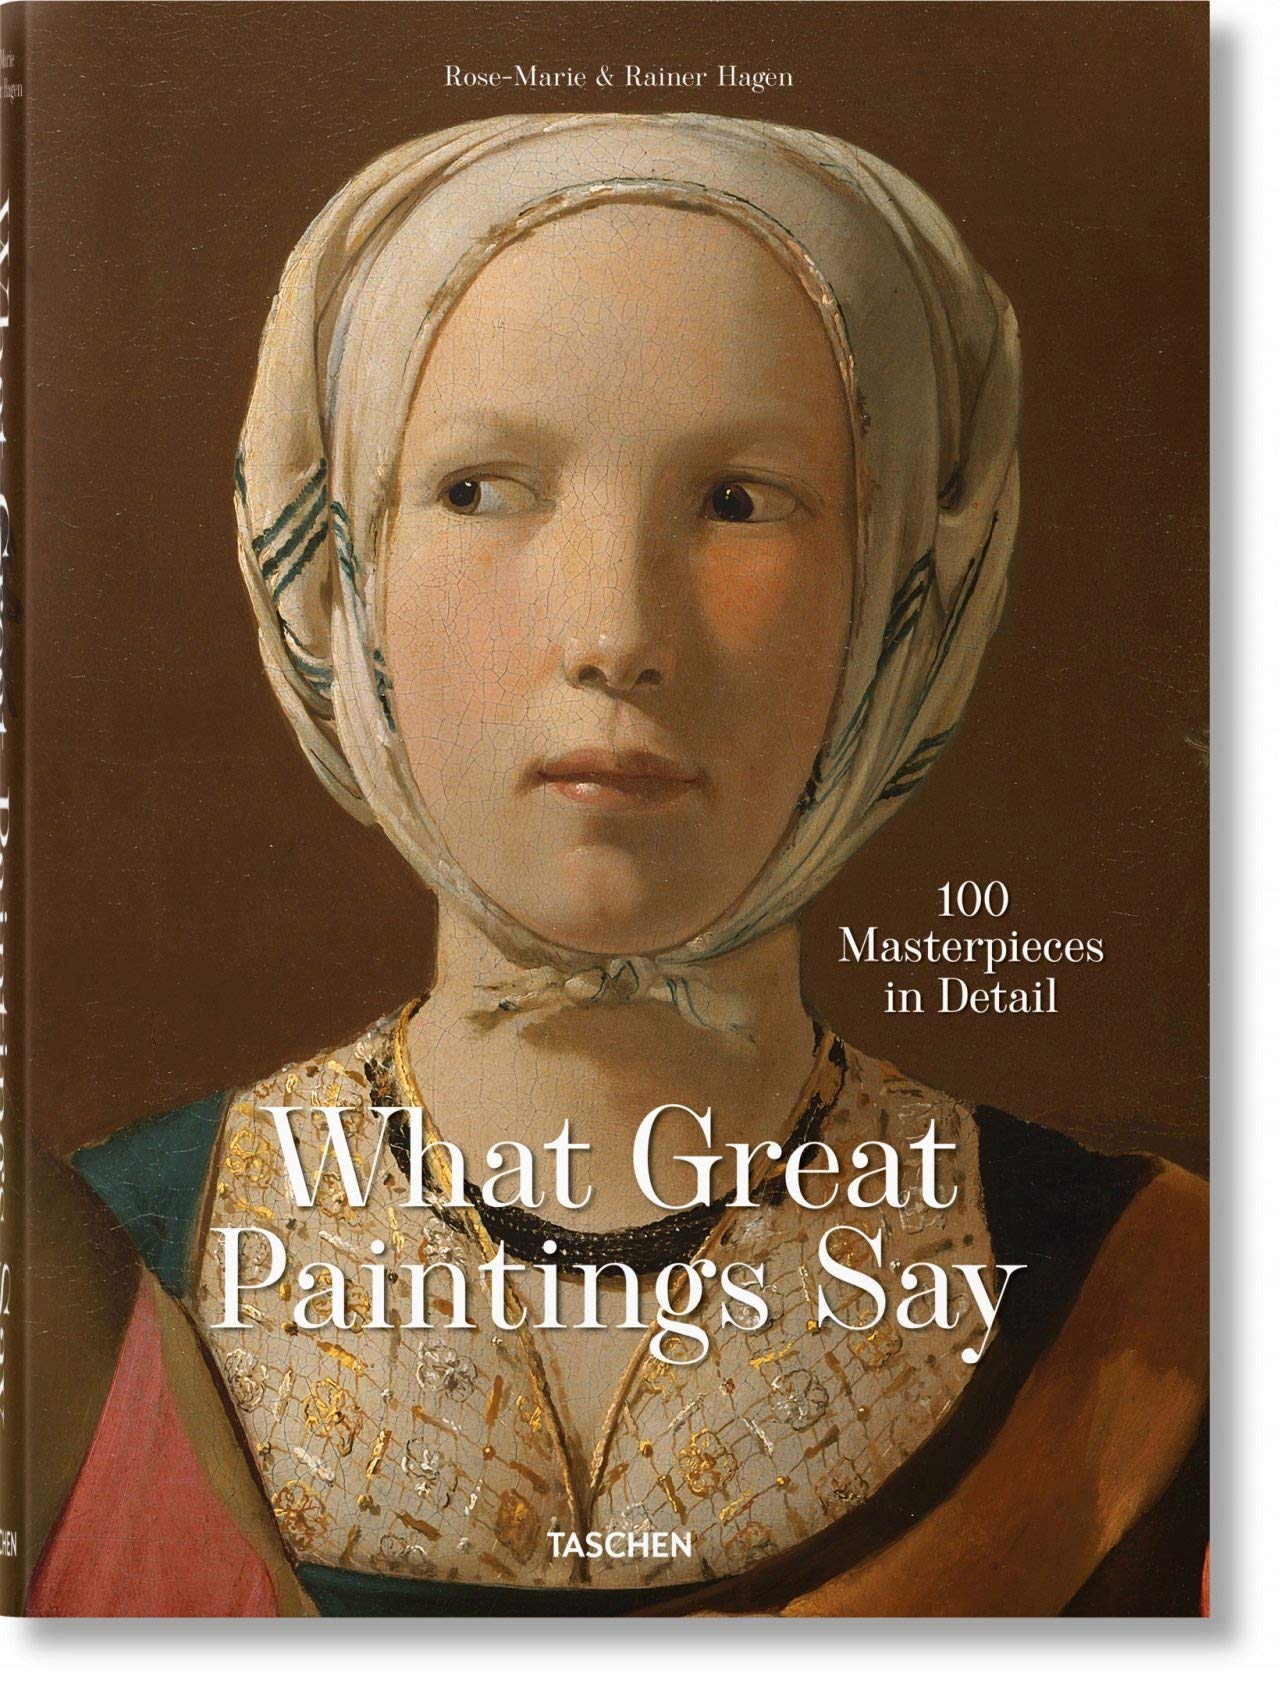 What Great Paintings Say. 100 Masterpieces in Detail | Rainer & Rose-Marie Hagen